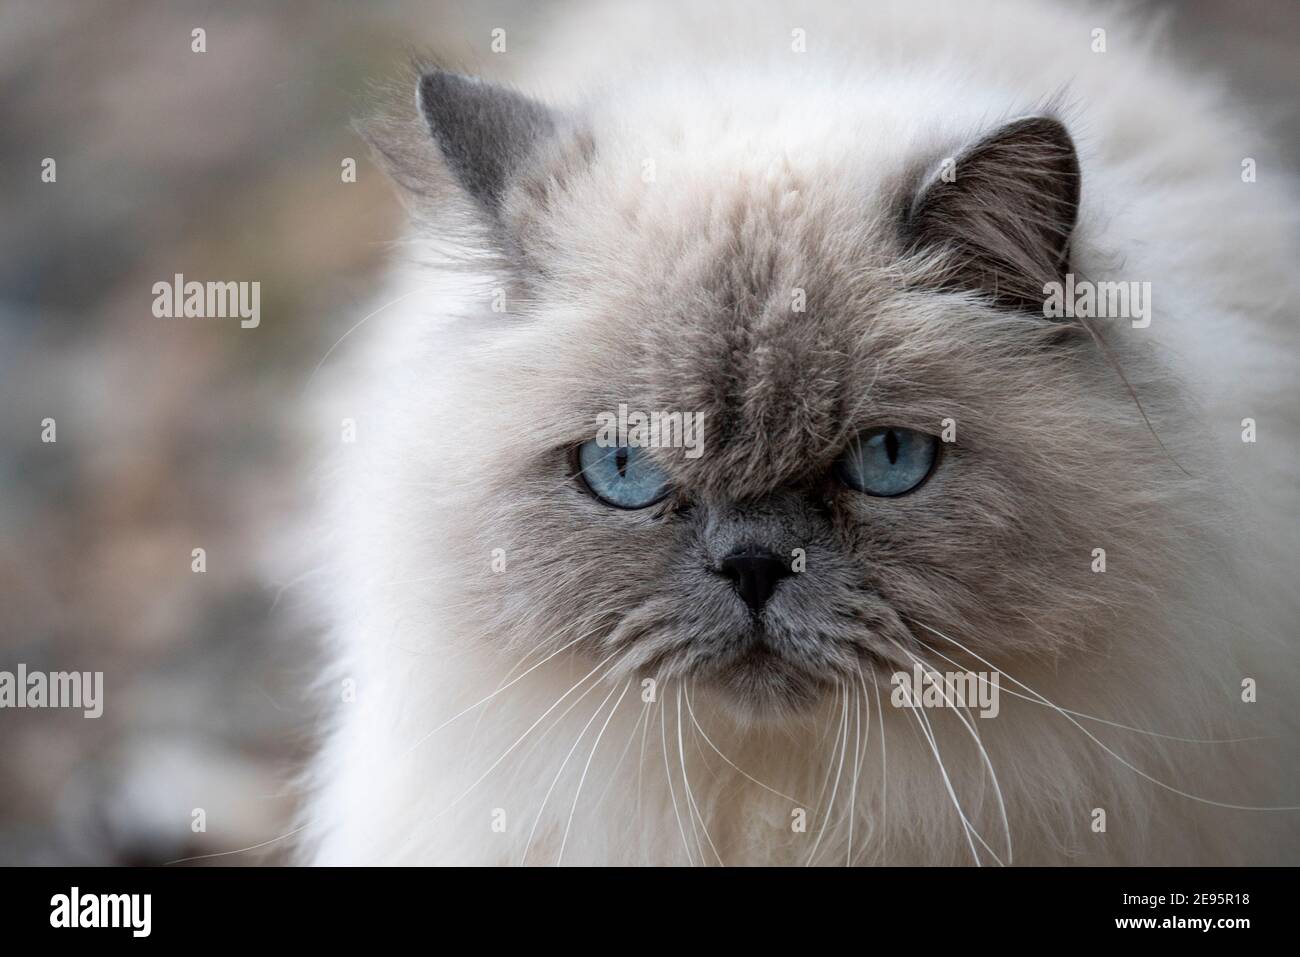 Lovely adult Ragdoll Cat with curious Blue Eyes and fluffy white fur Looking at the camera with tilted head. Stock Photo